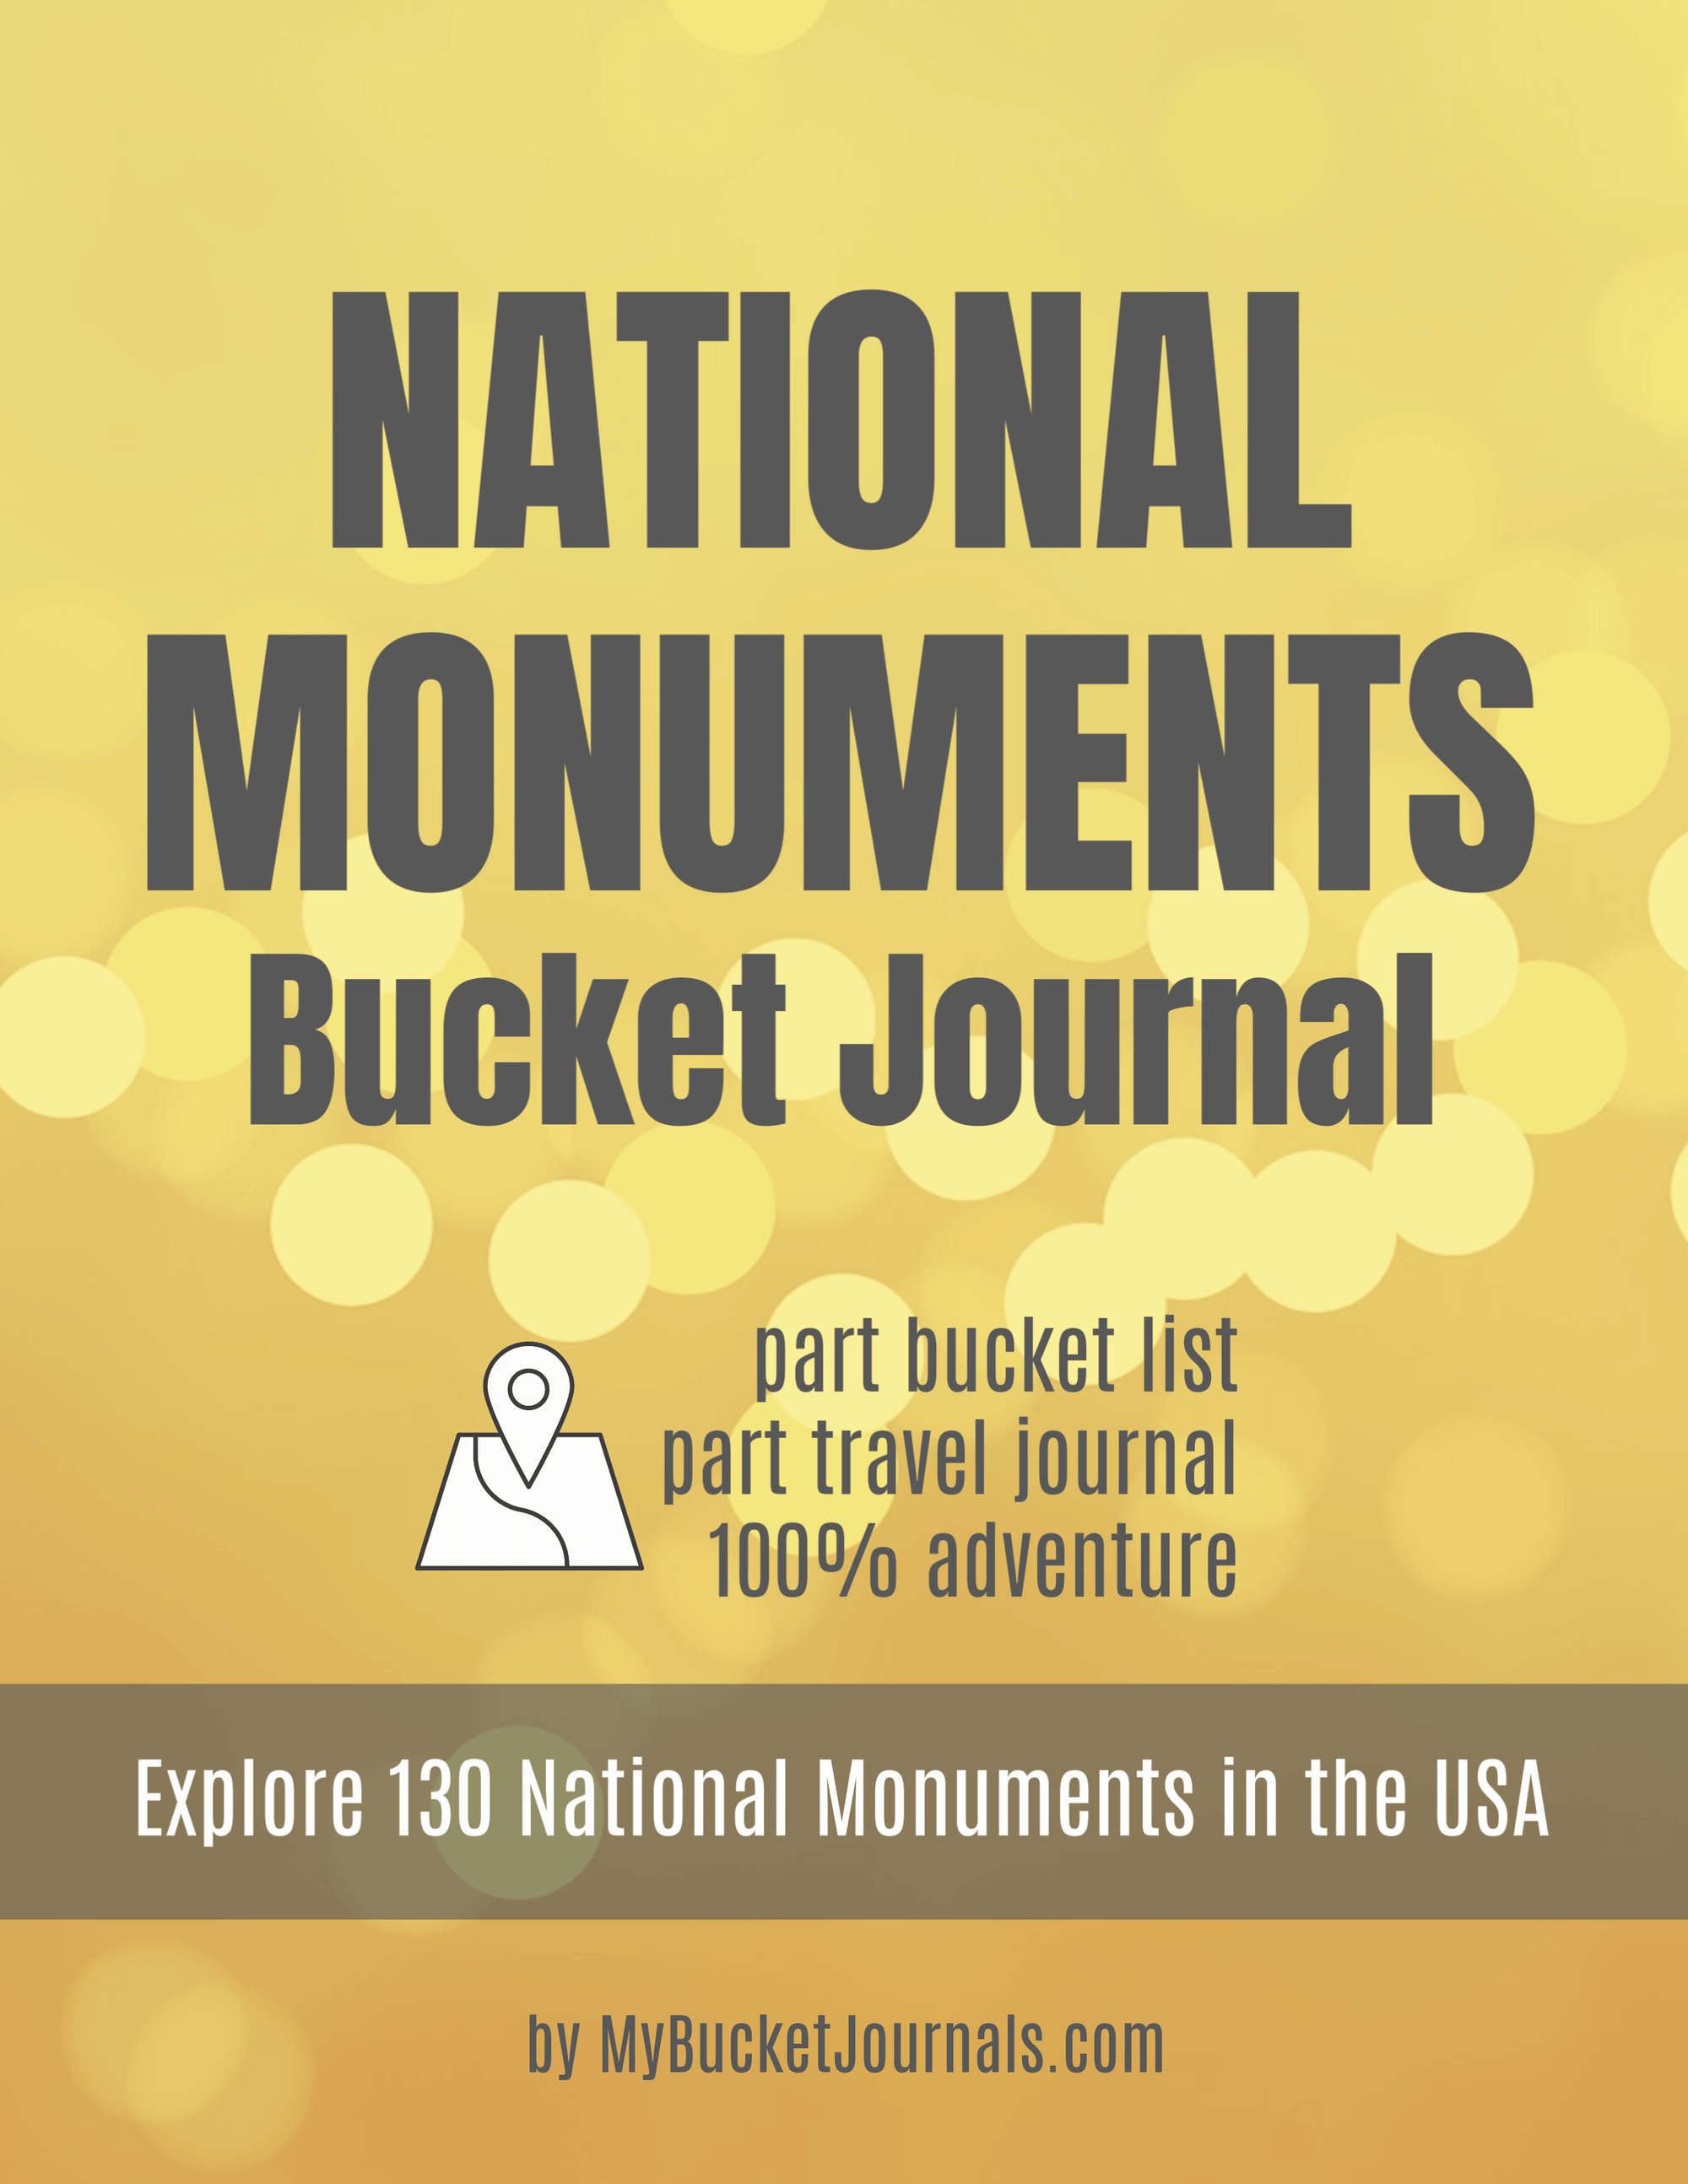 SD-National Monuments Bucket Journal